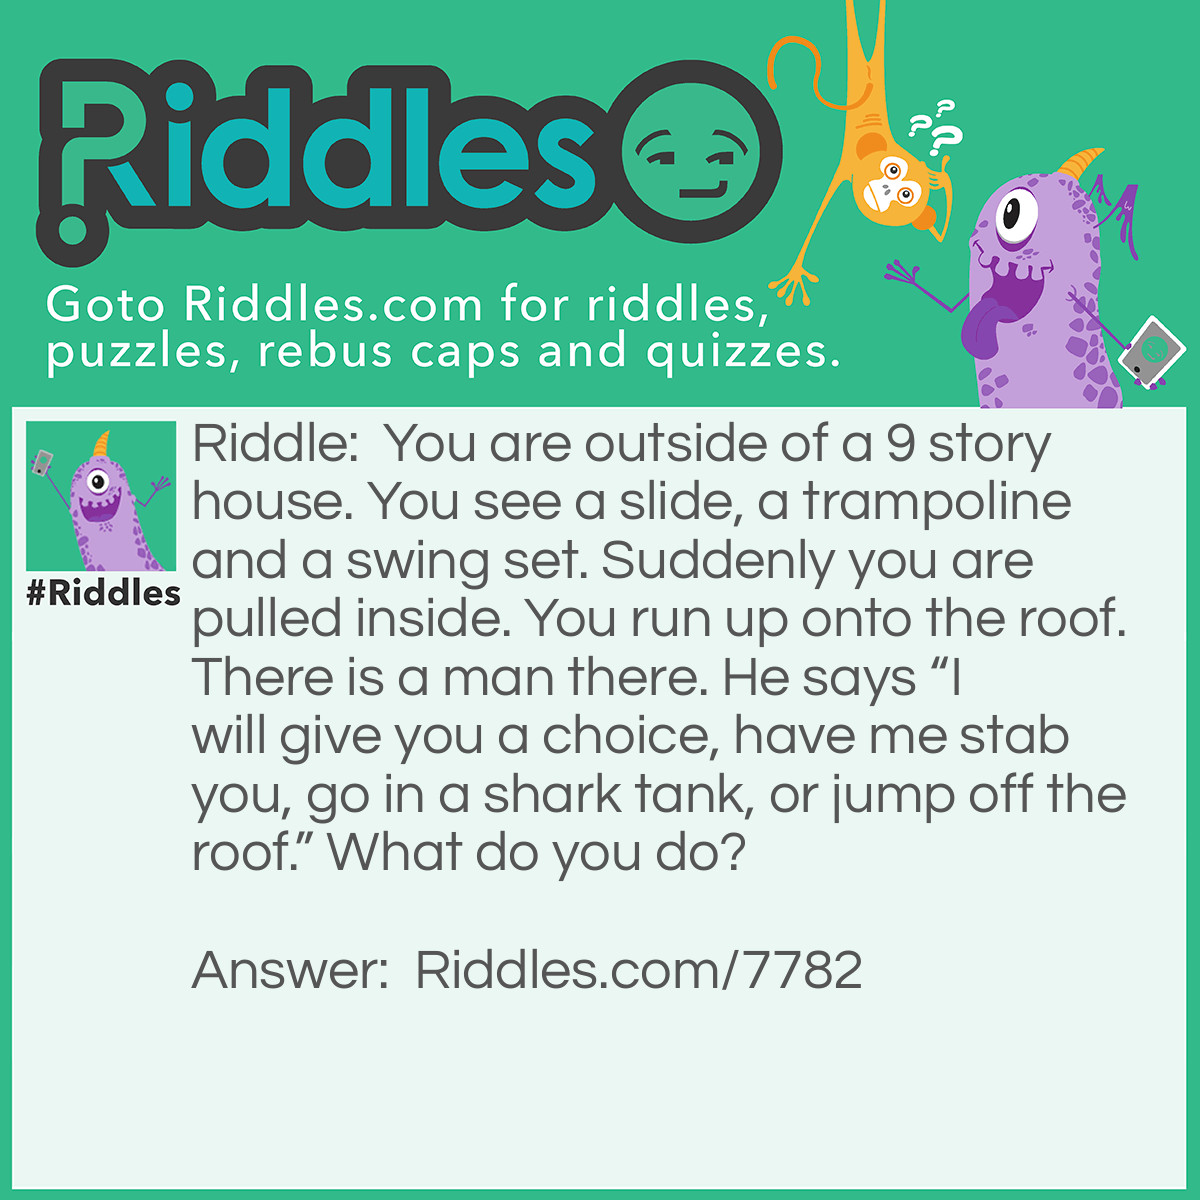 Riddle: You are outside of a 9 story house. You see a slide, a trampoline and a swing set. Suddenly you are pulled inside. You run up onto the roof. There is a man there. He says "I will give you a choice, have me stab you, go in a shark tank, or jump off the roof." What do you do? Answer: You jump off the roof. Because you could jump onto the trampoline.